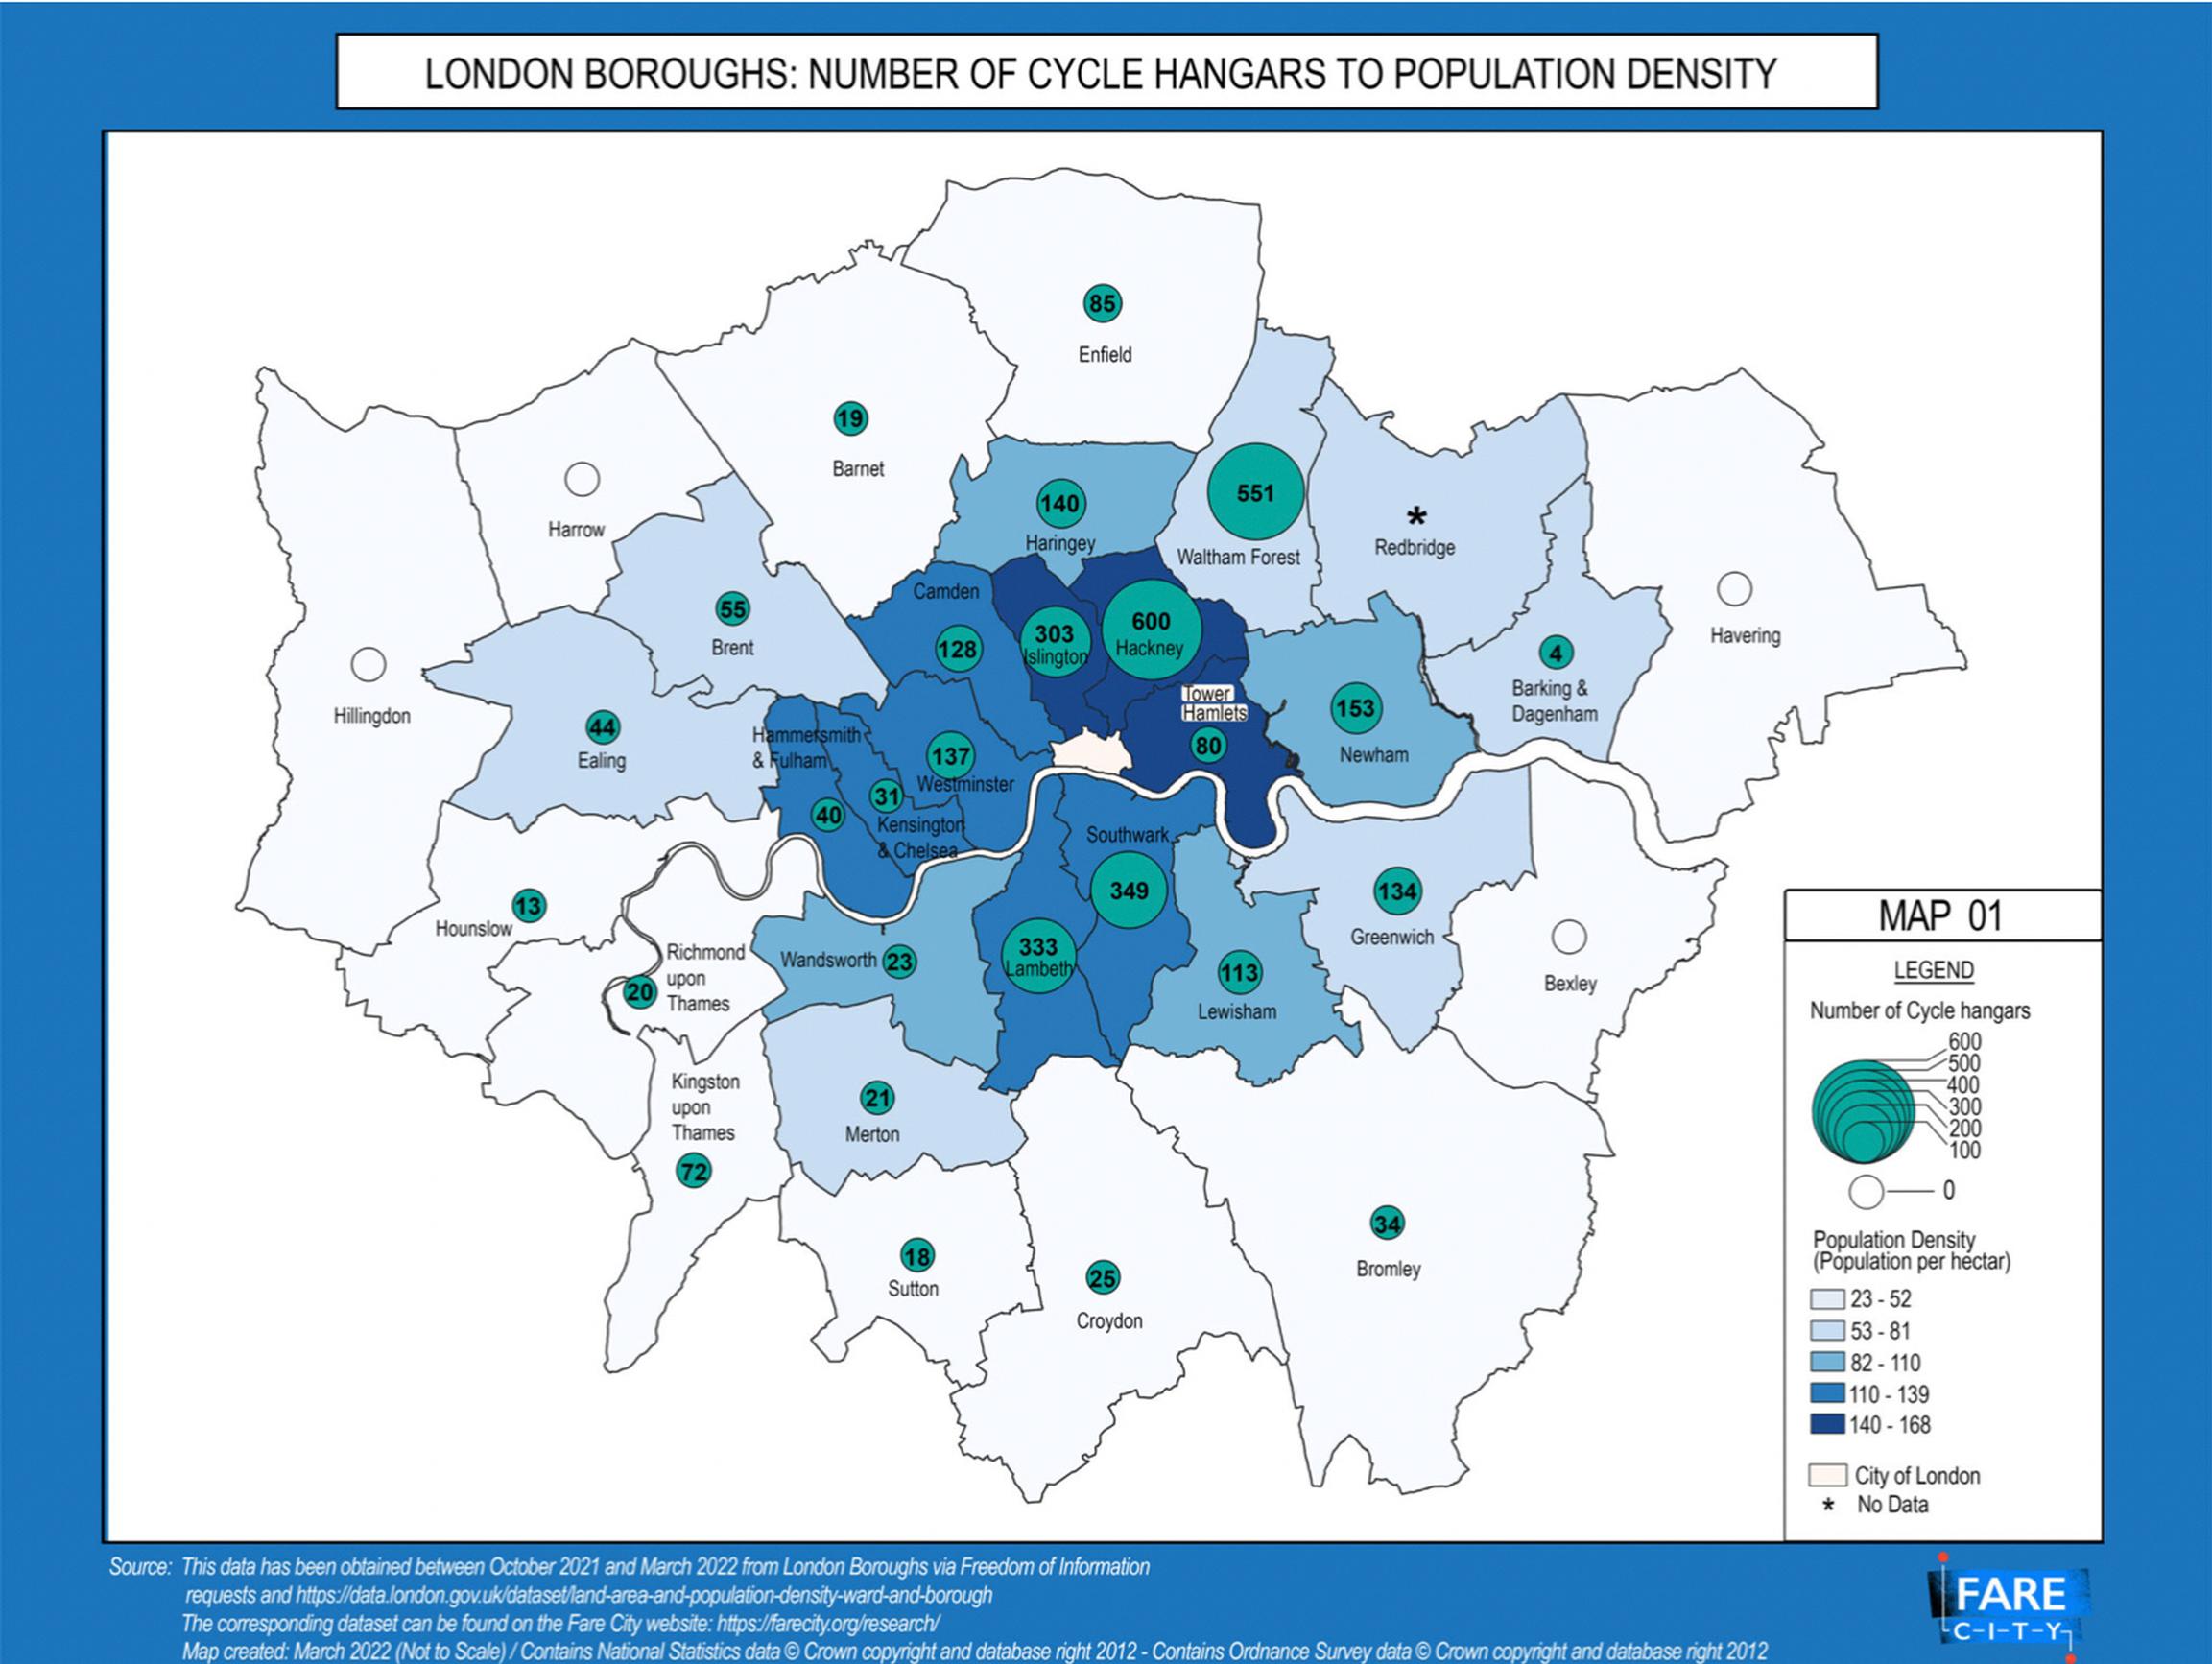 Huge disparities in cycle parking across capital, think tank reports